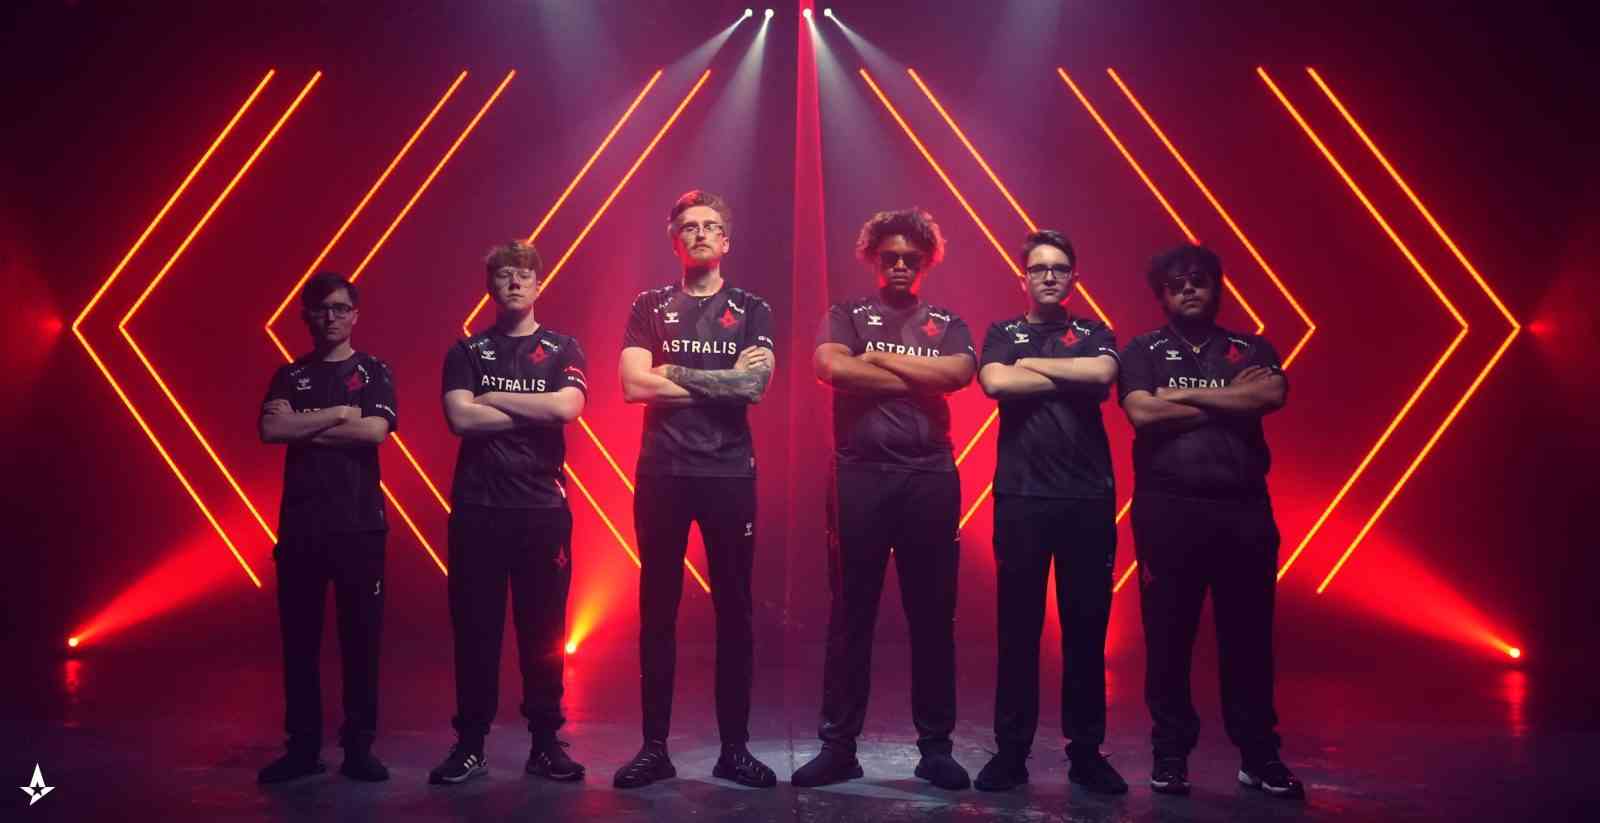 The 2021 Astralis Rainbow Six roster, acquired from Disrupt Gaming